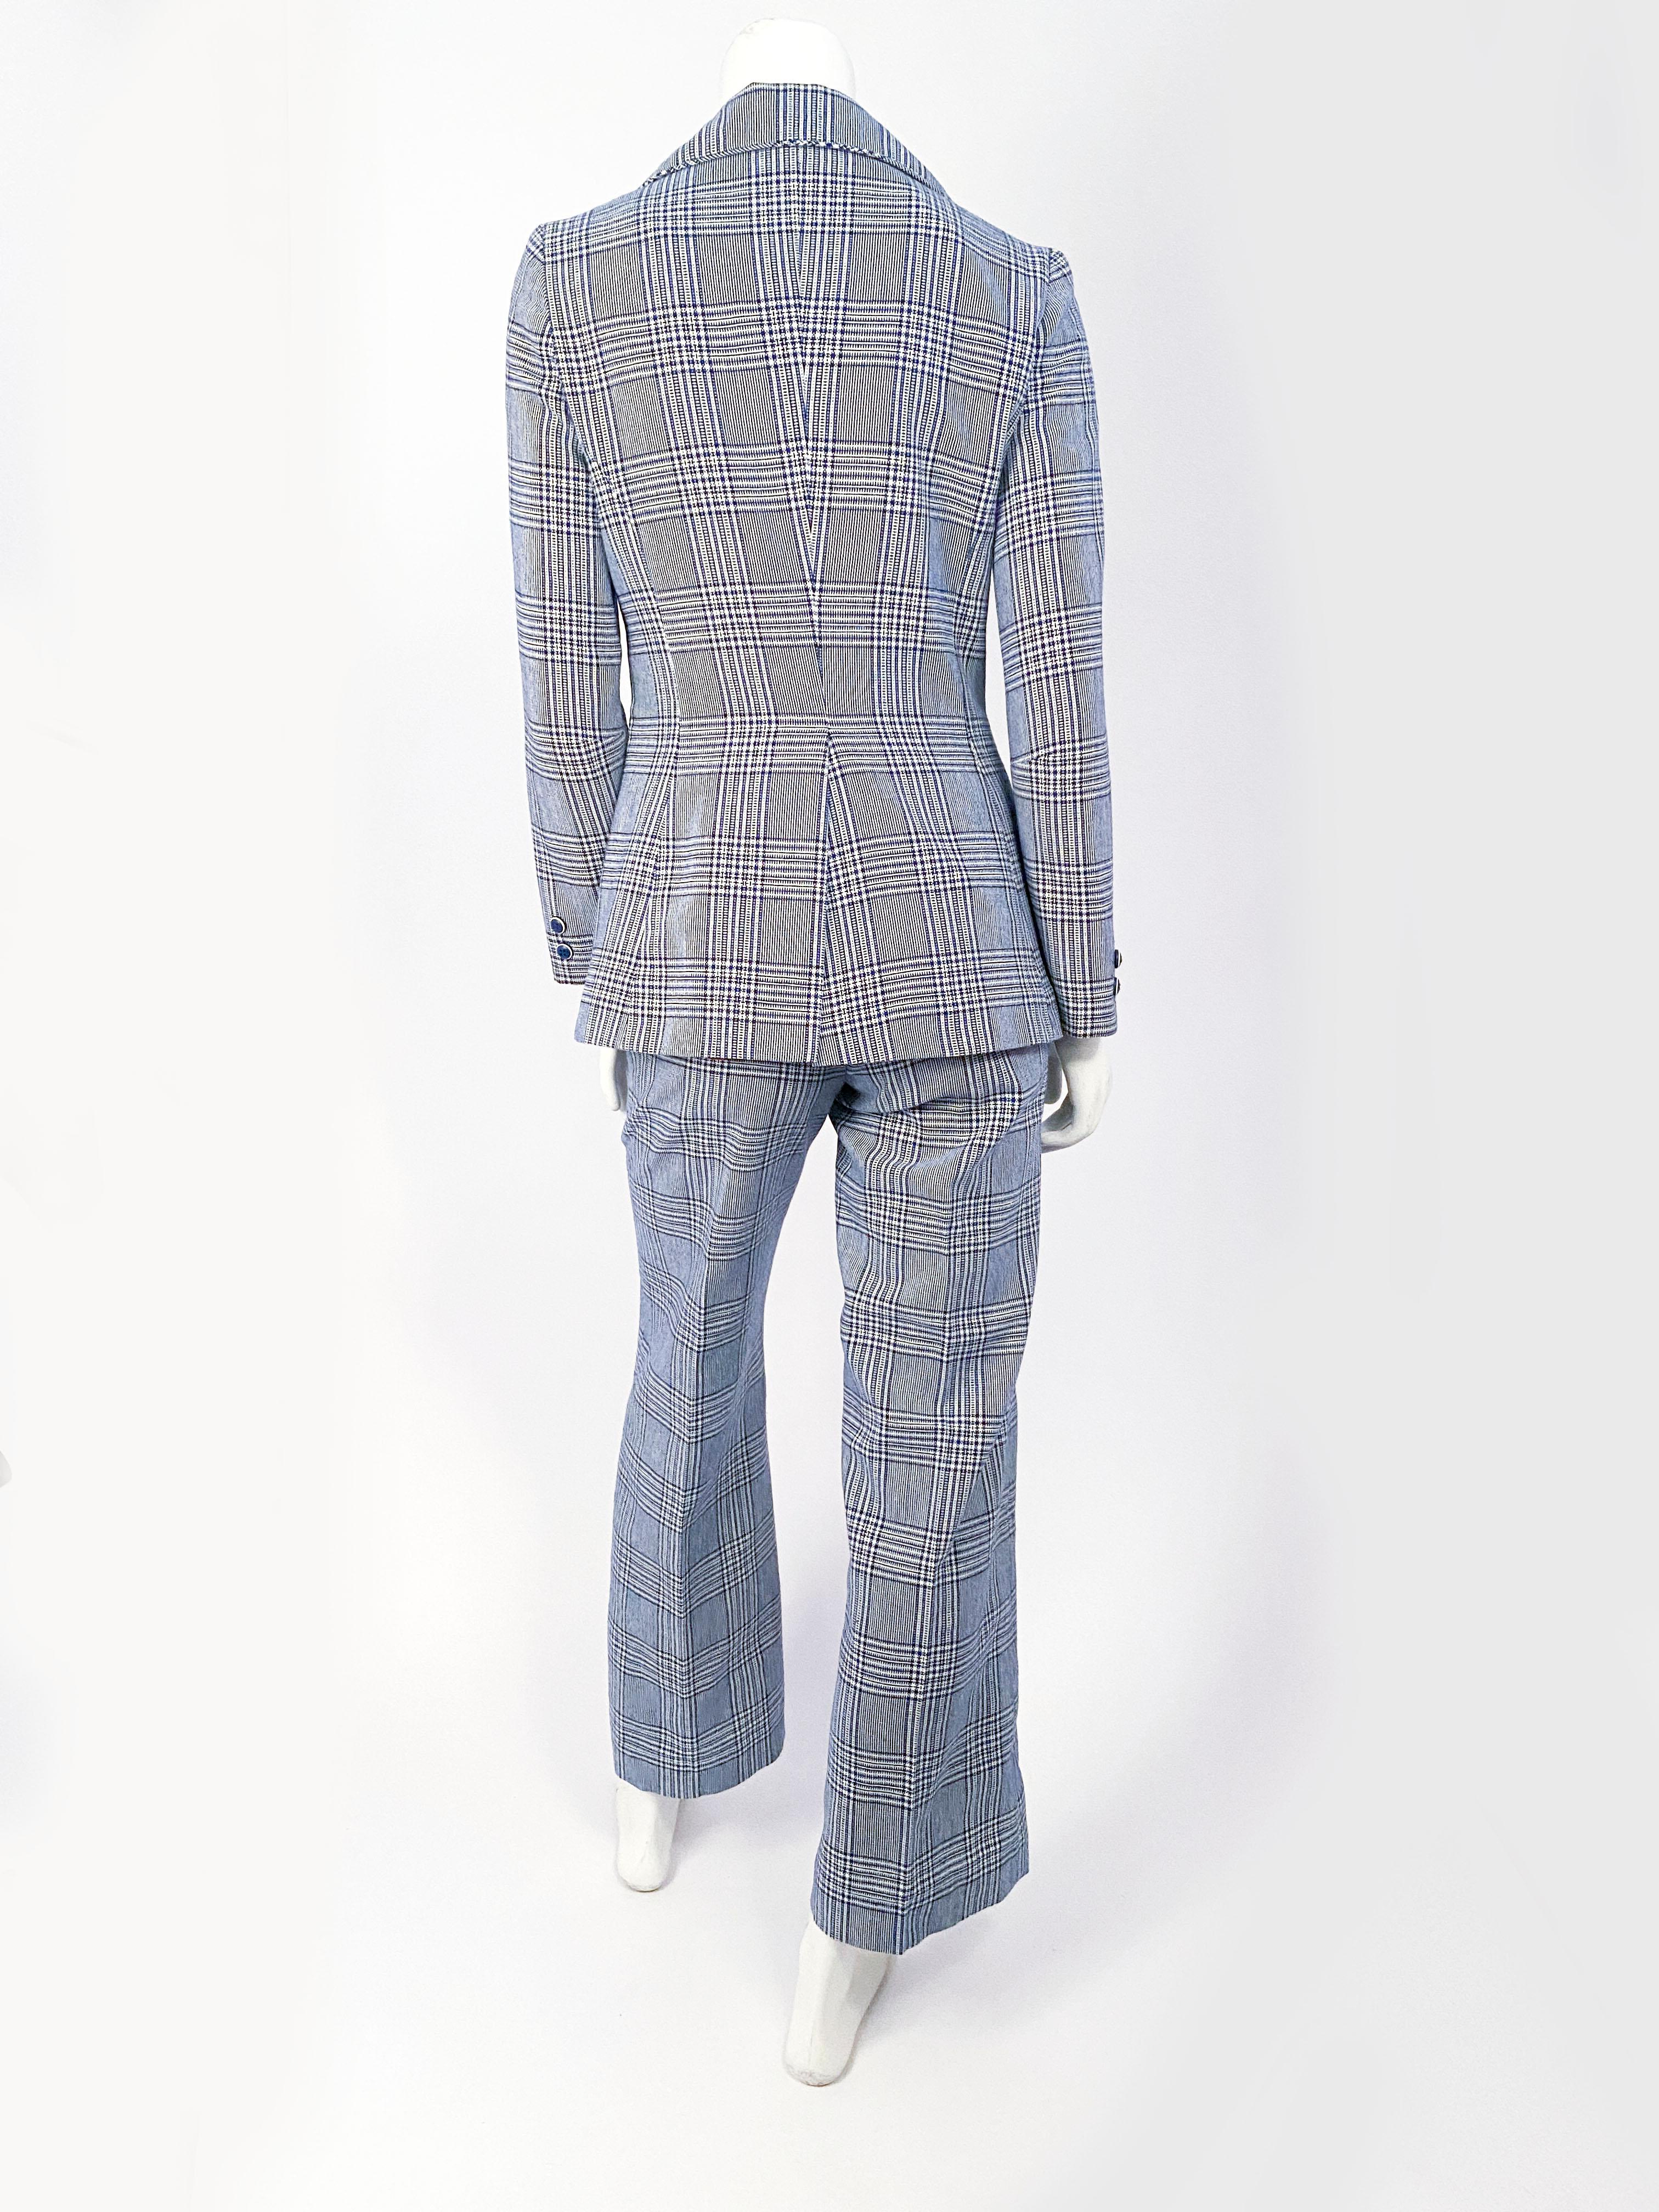 Women's 1970s Navy and White Plaid Mod Pant Suit